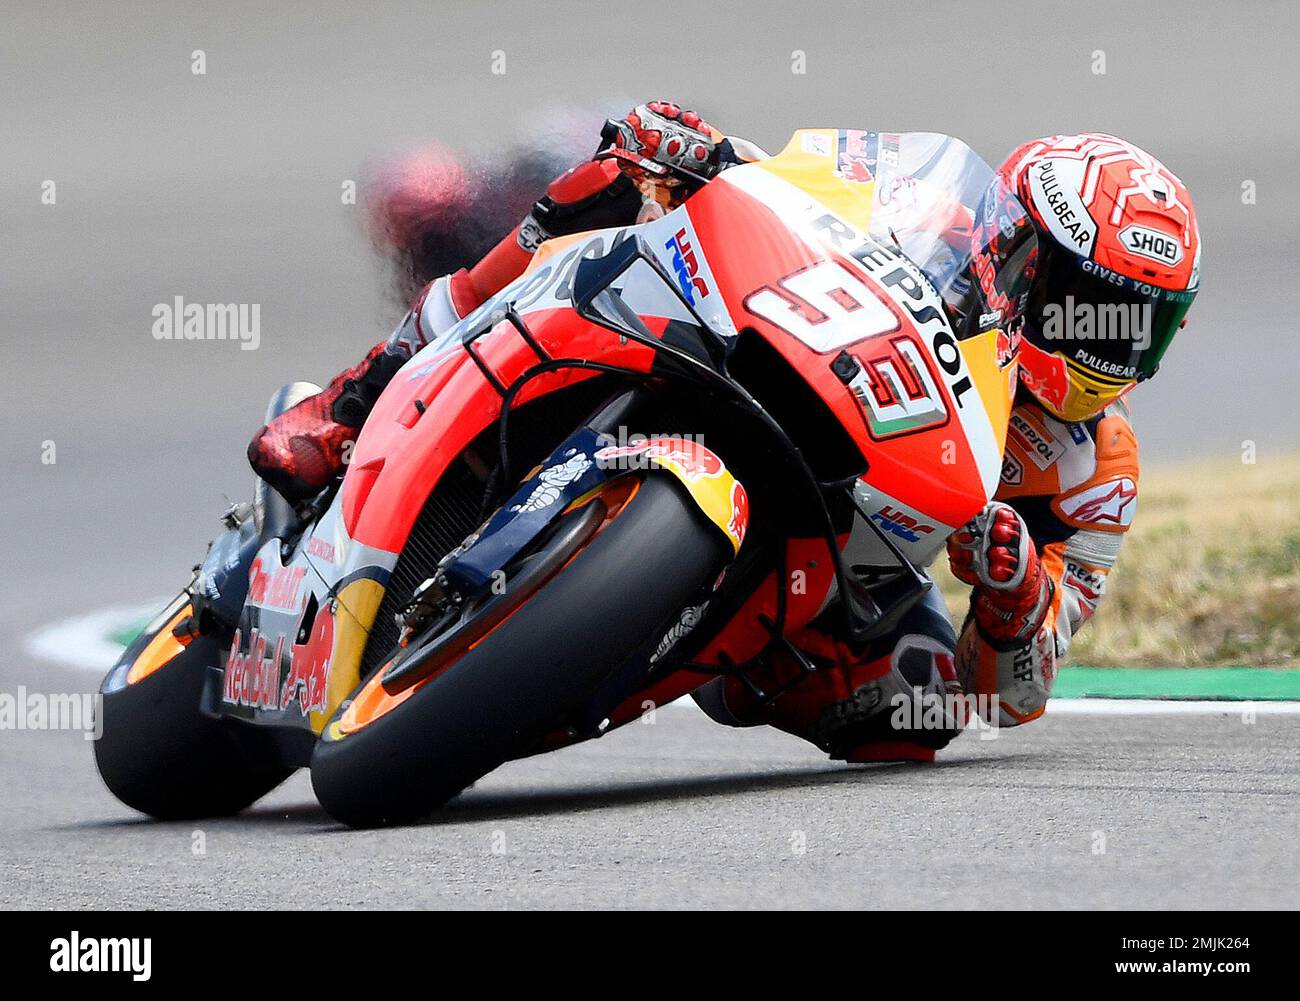 MotoGP Honda rider Marc Marquez of Spain steers his motorcycle during the MotoGP qualifying at German Motorcycle Grand Prix at the Sachsenring circuit in Hohenstein-Ernstthal, Germany, Saturday, July 6, 2019